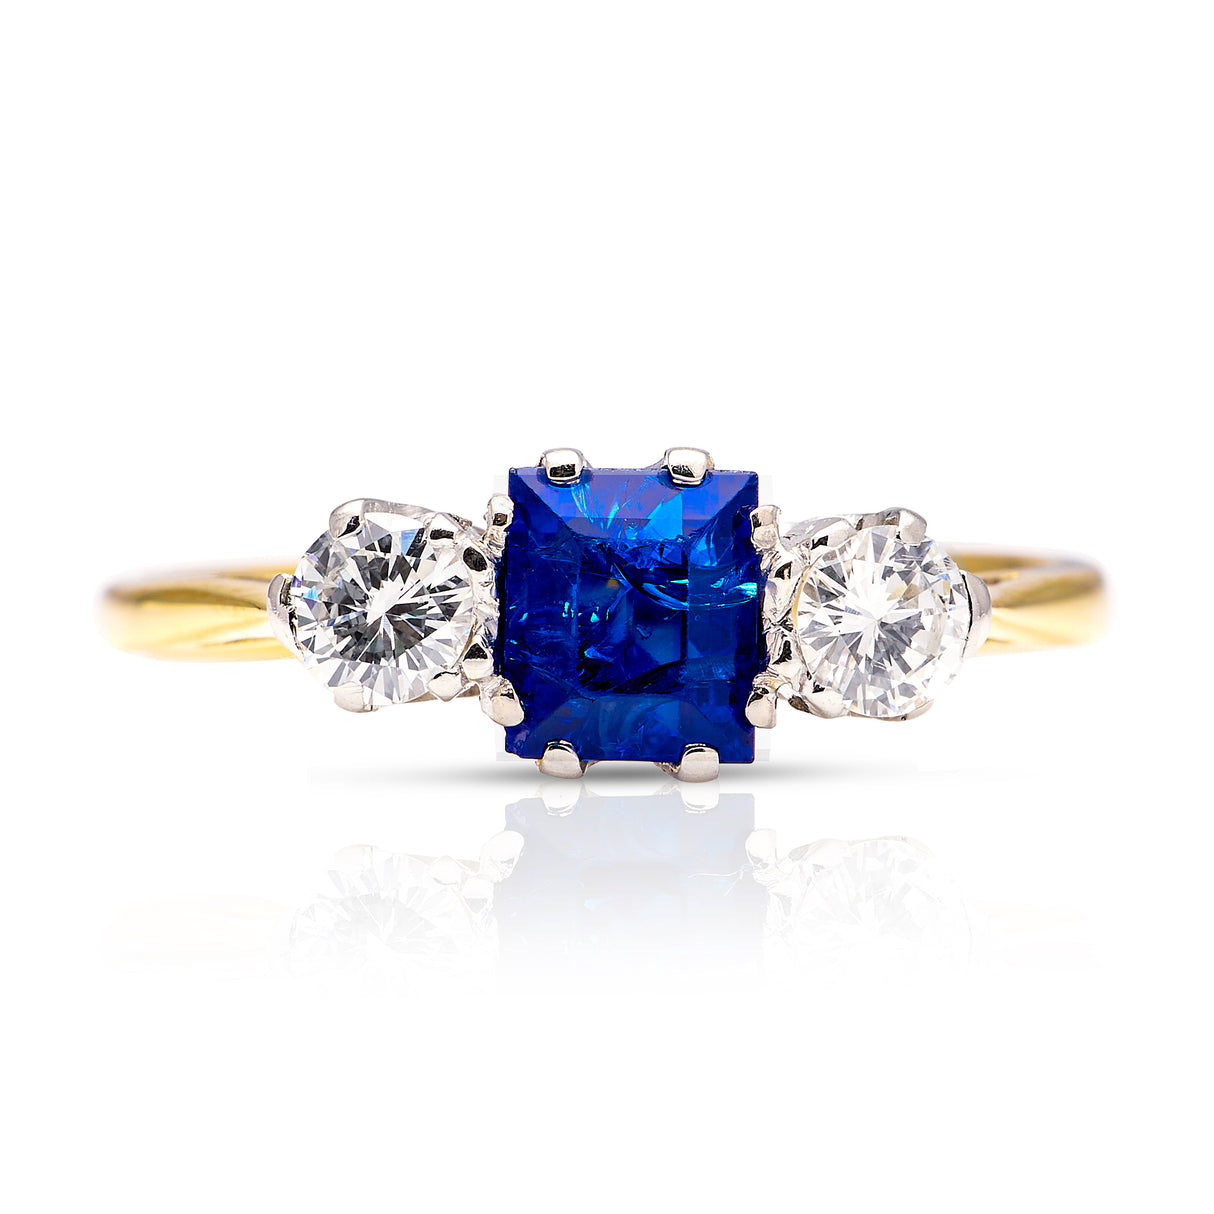 Antique, Edwardian Sapphire and Diamond Three-Stone Engagement Ring, 18ct Yellow Gold and Platinum